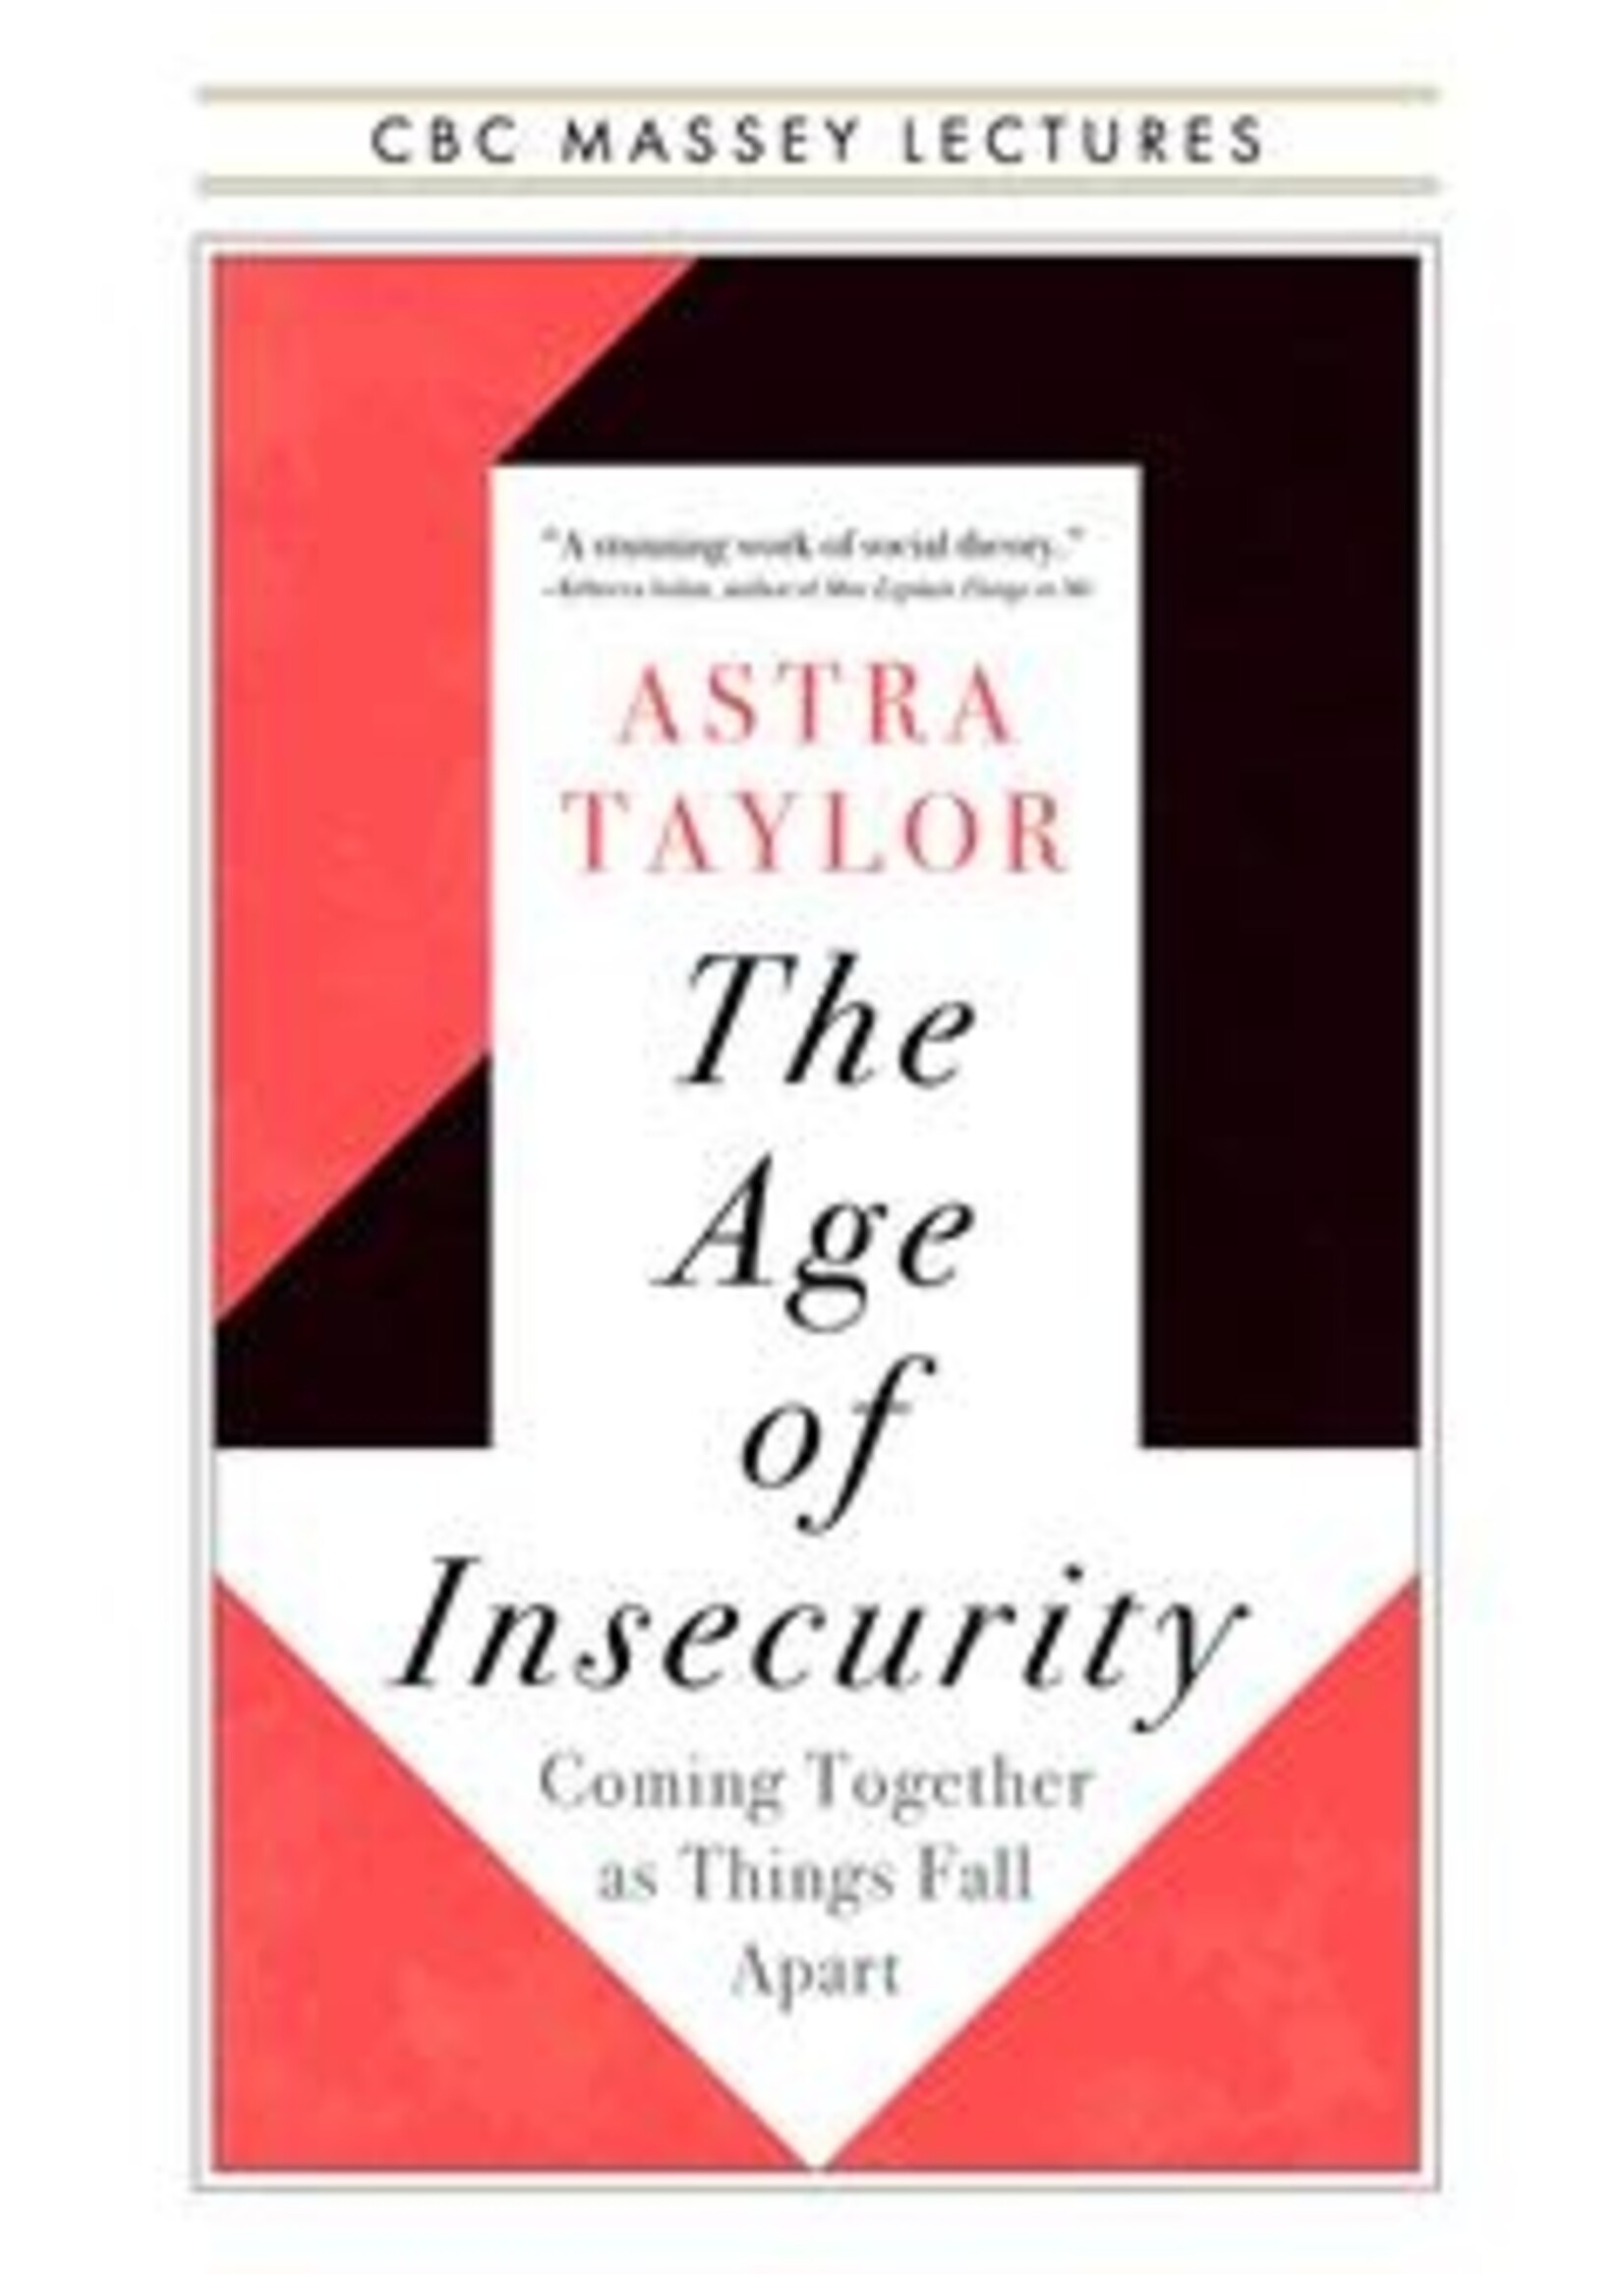 The Age of Insecurity: Coming Together as Things Fall Apart by Astra Taylor